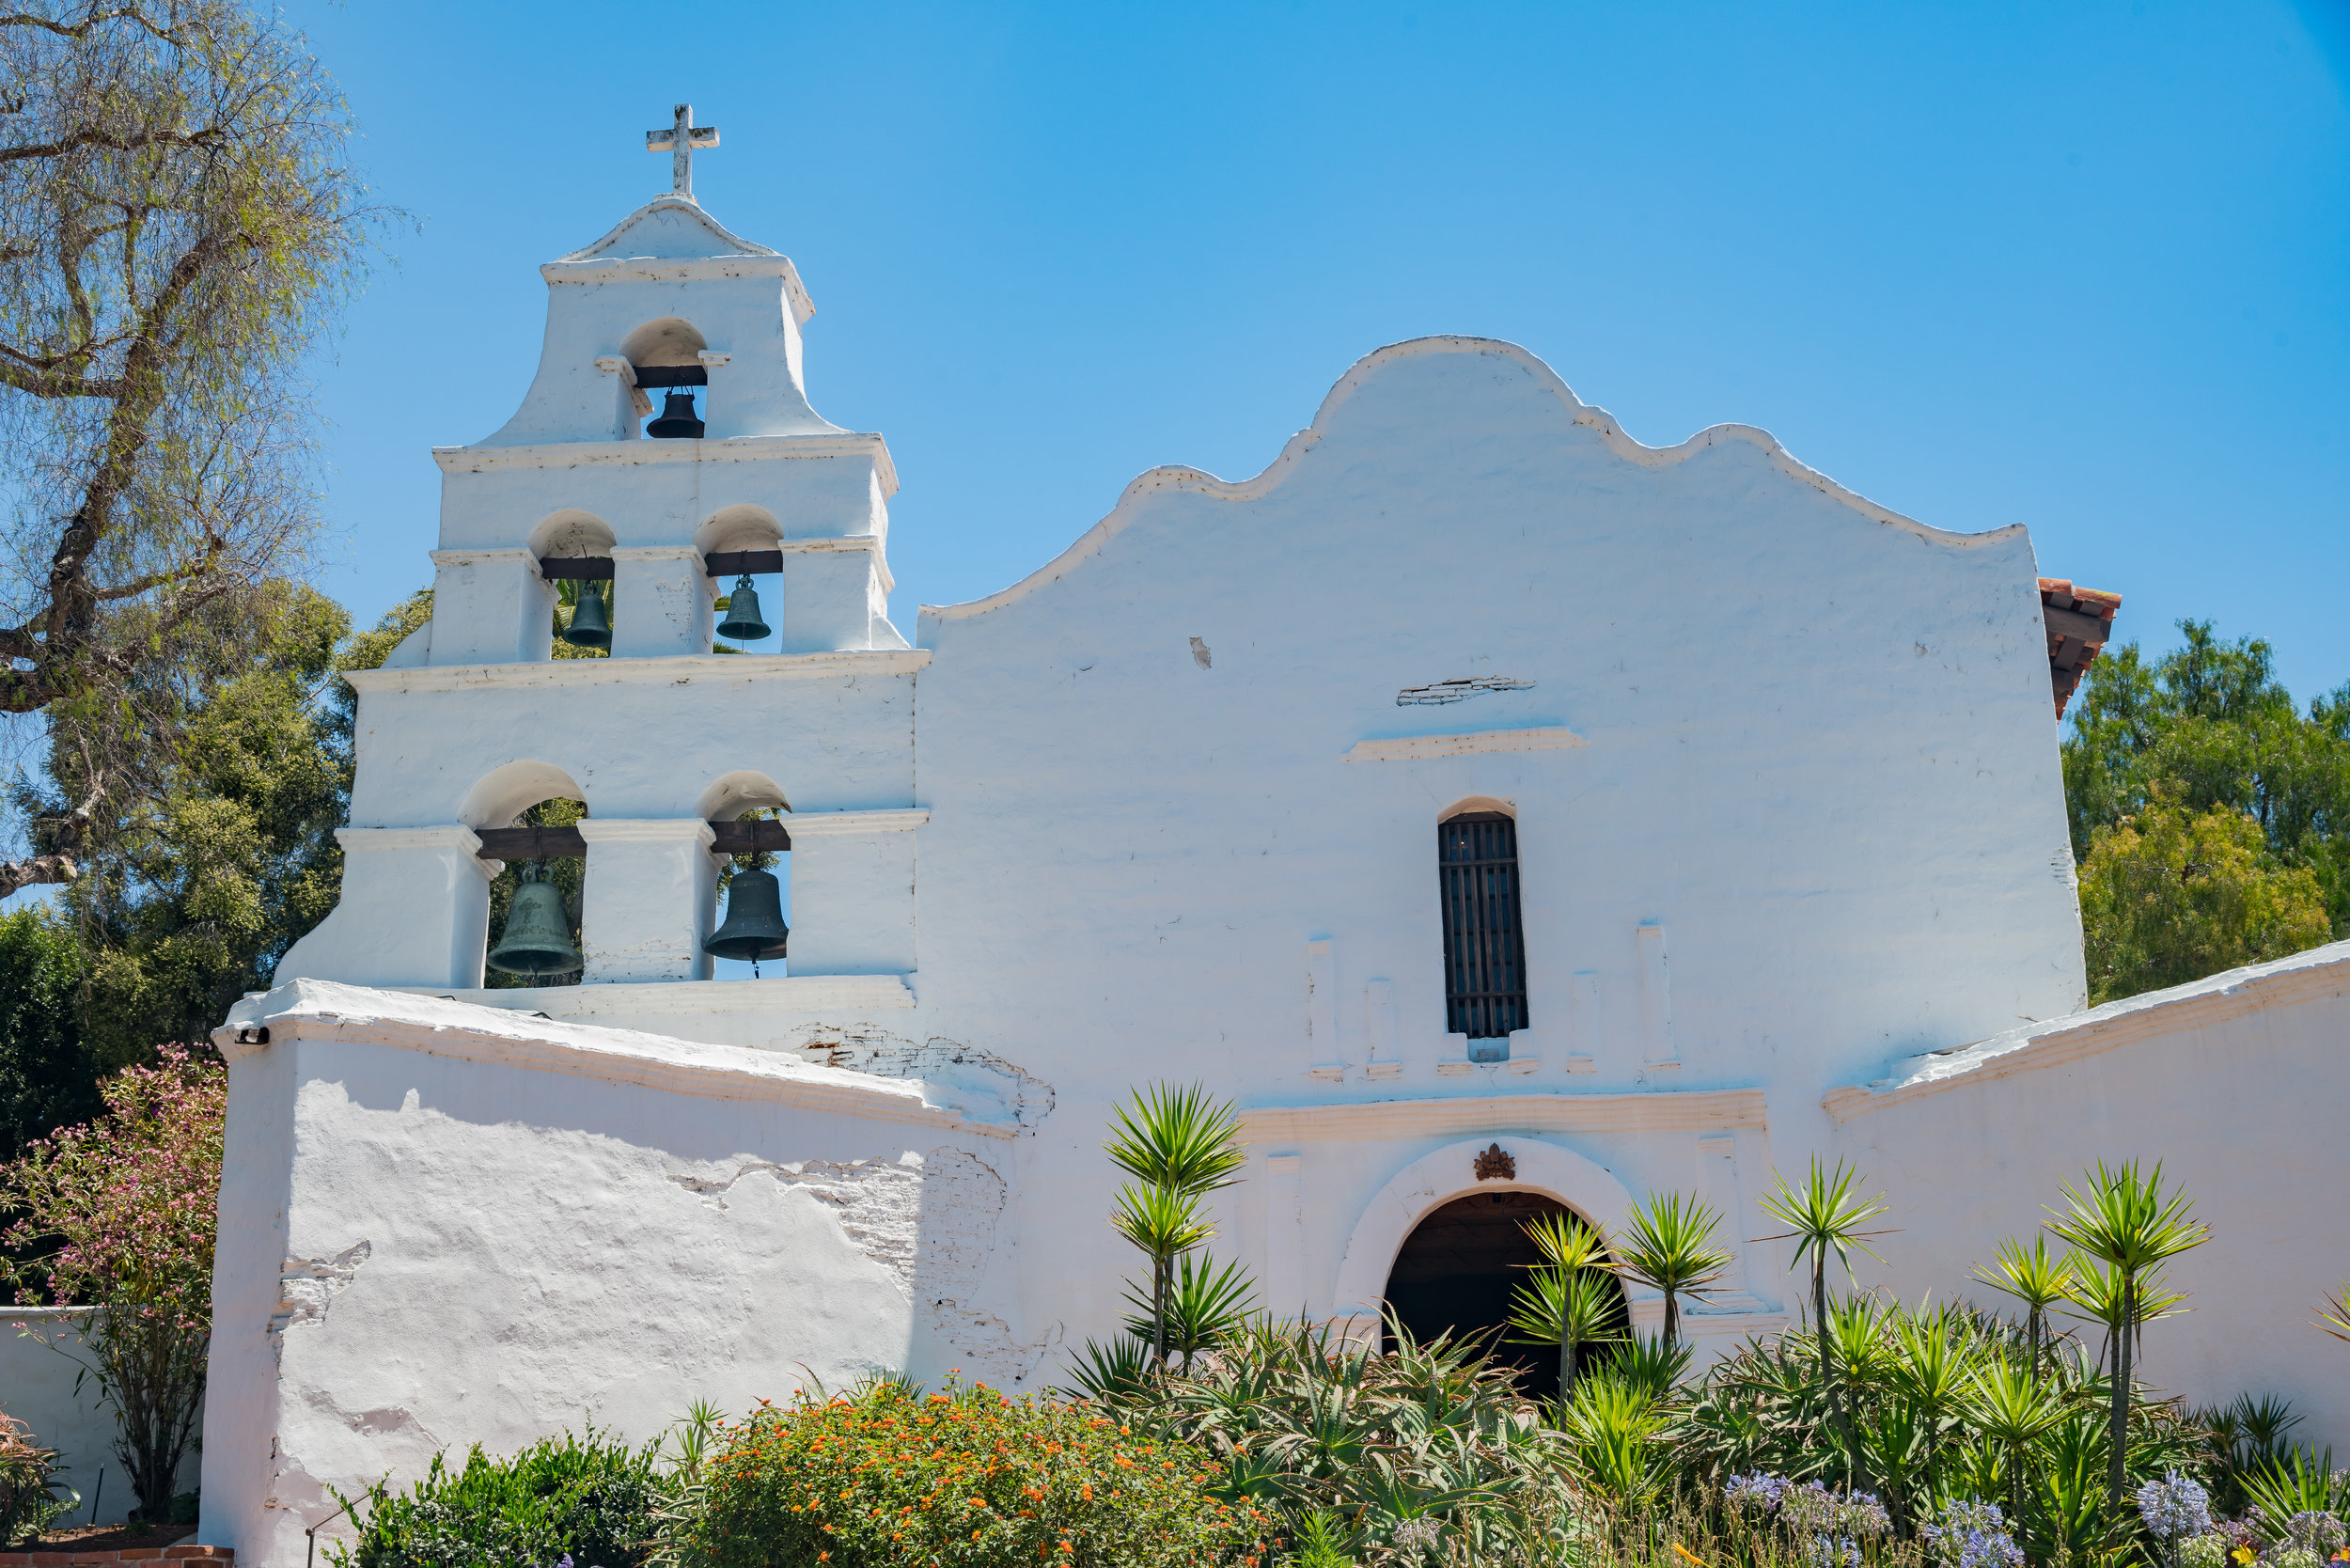 Exterior view of the historical Mission San Diego de Alcala